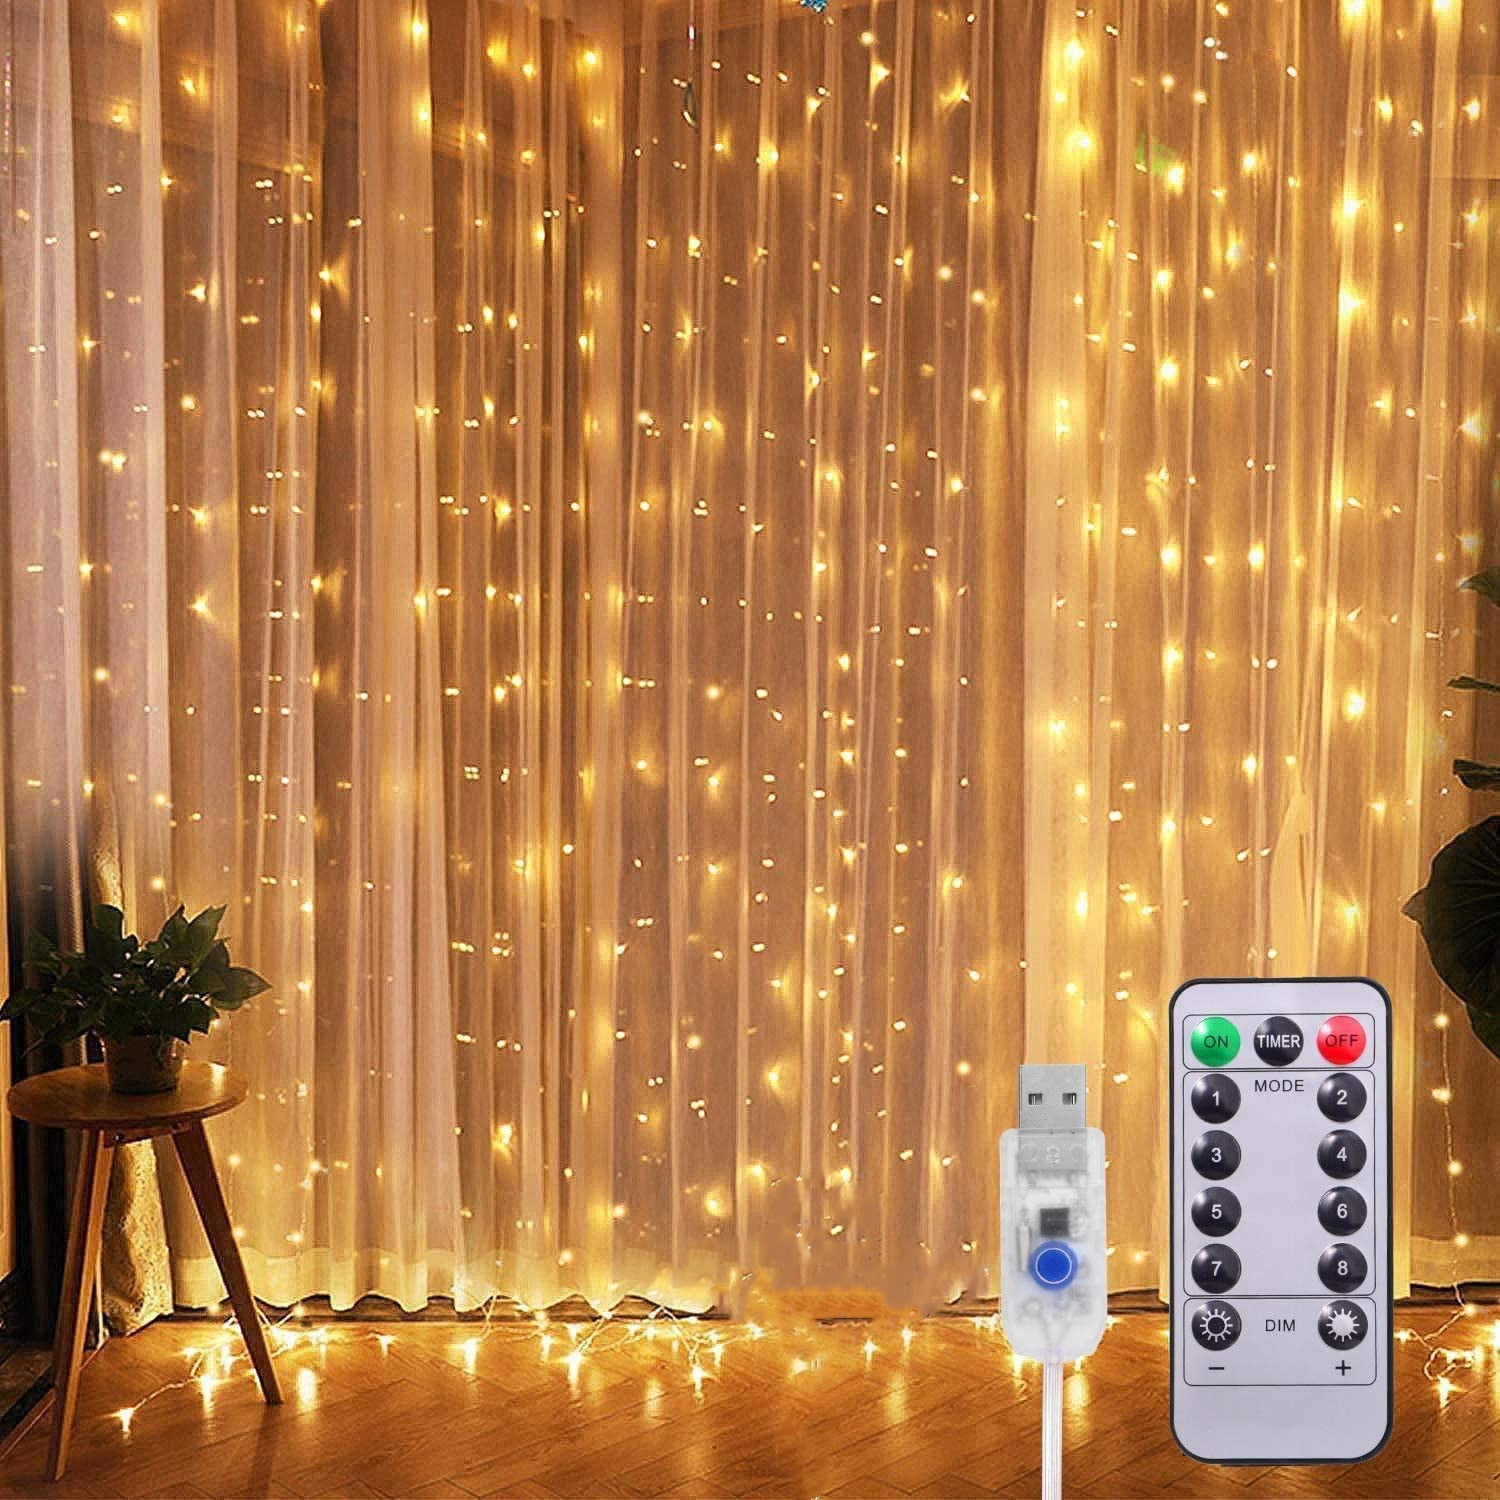 LED Snowflake Curtain Fairy String Twinkle Window Lights Christmas Party Wedding